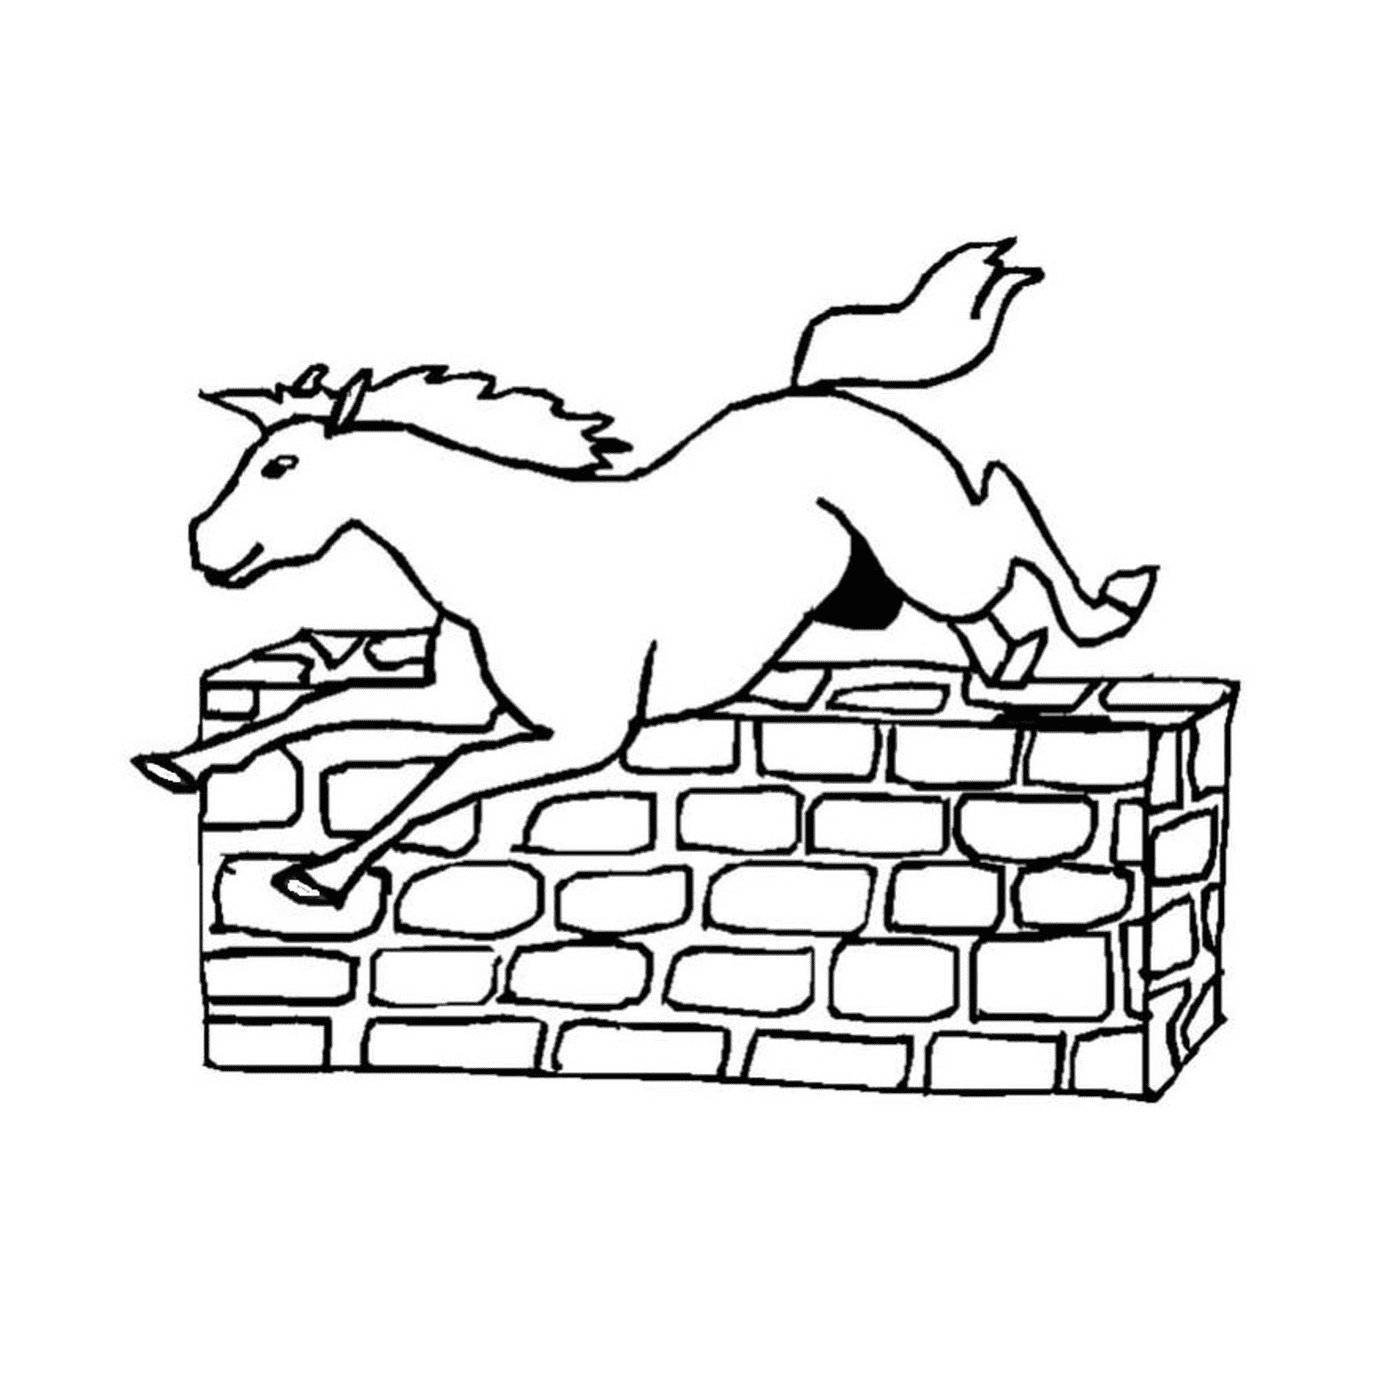  Bold jumping horse over a wall 